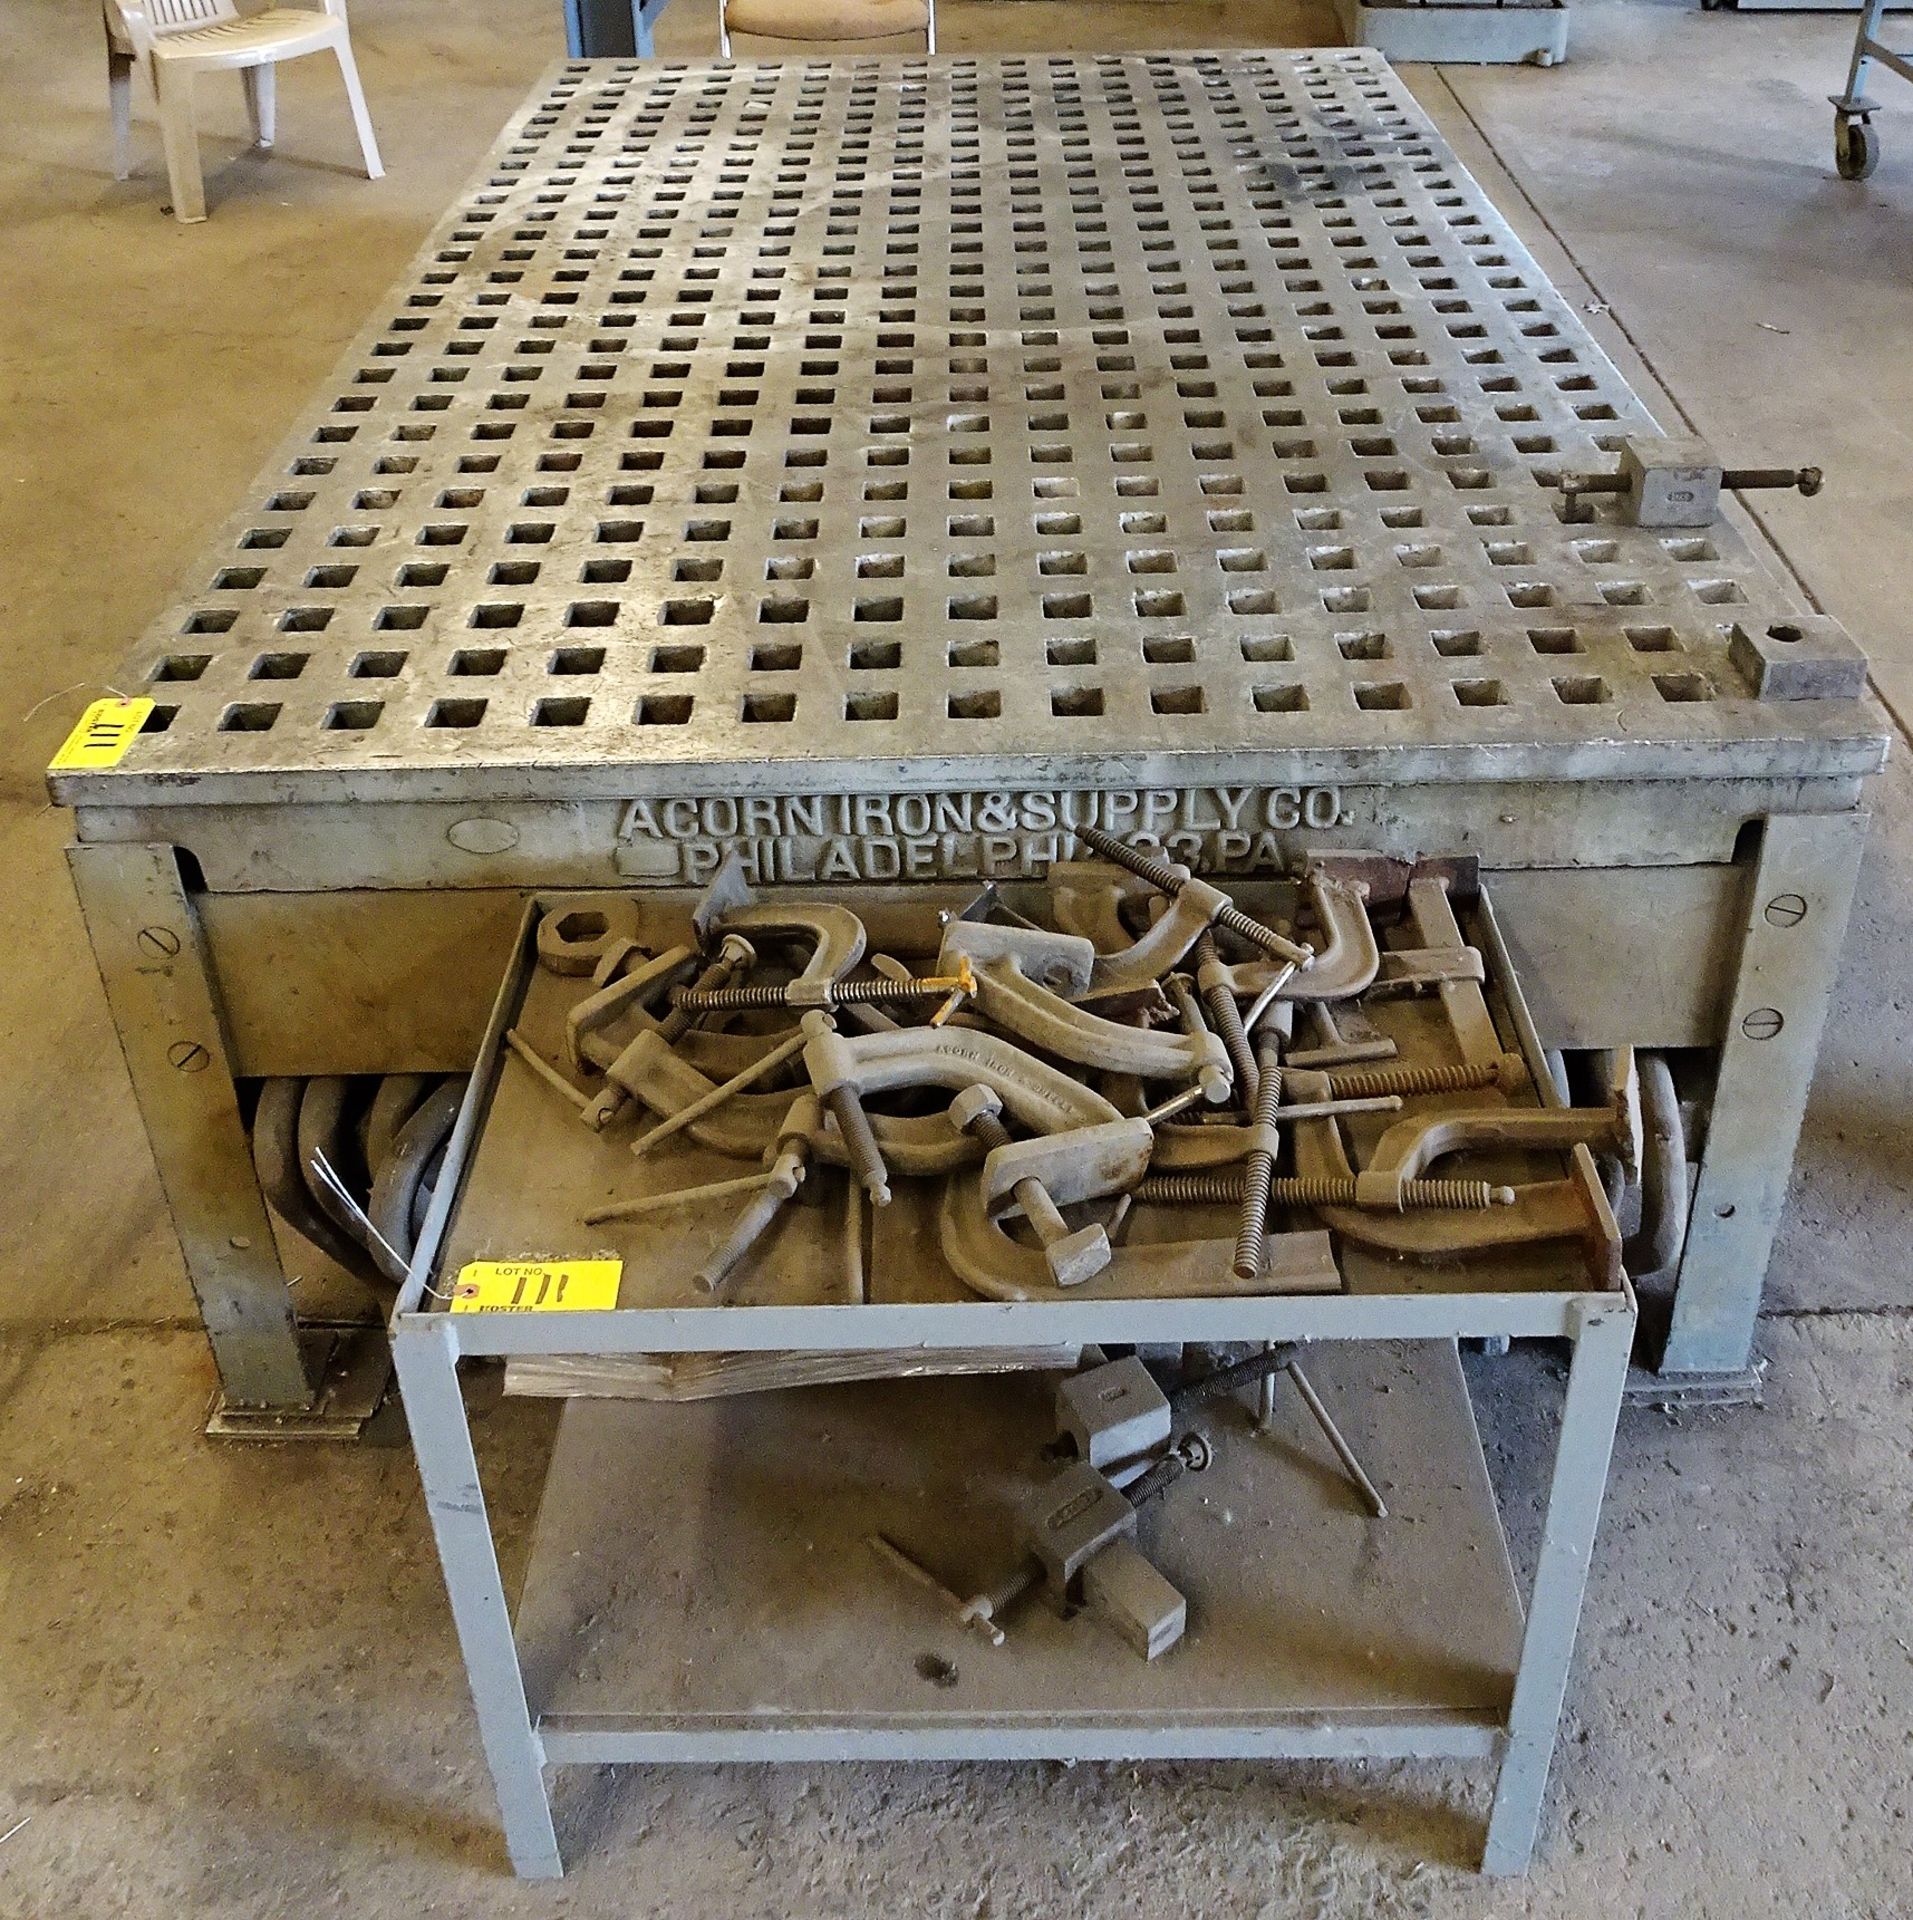 Acorn Iron and Supply Co. 5' x 8' Acorn Welding Table, with Associated Material Lock Downs - Image 2 of 2